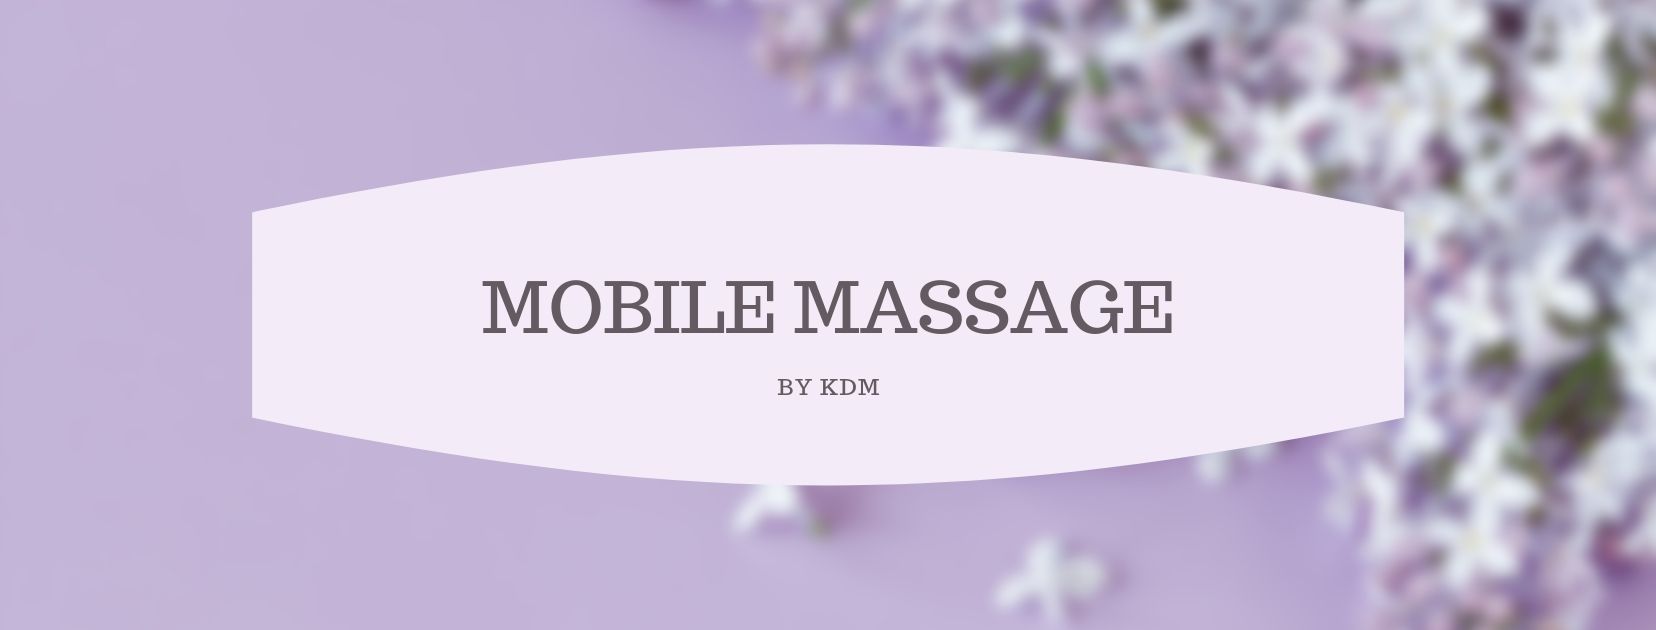 Mobile Massage by KDM